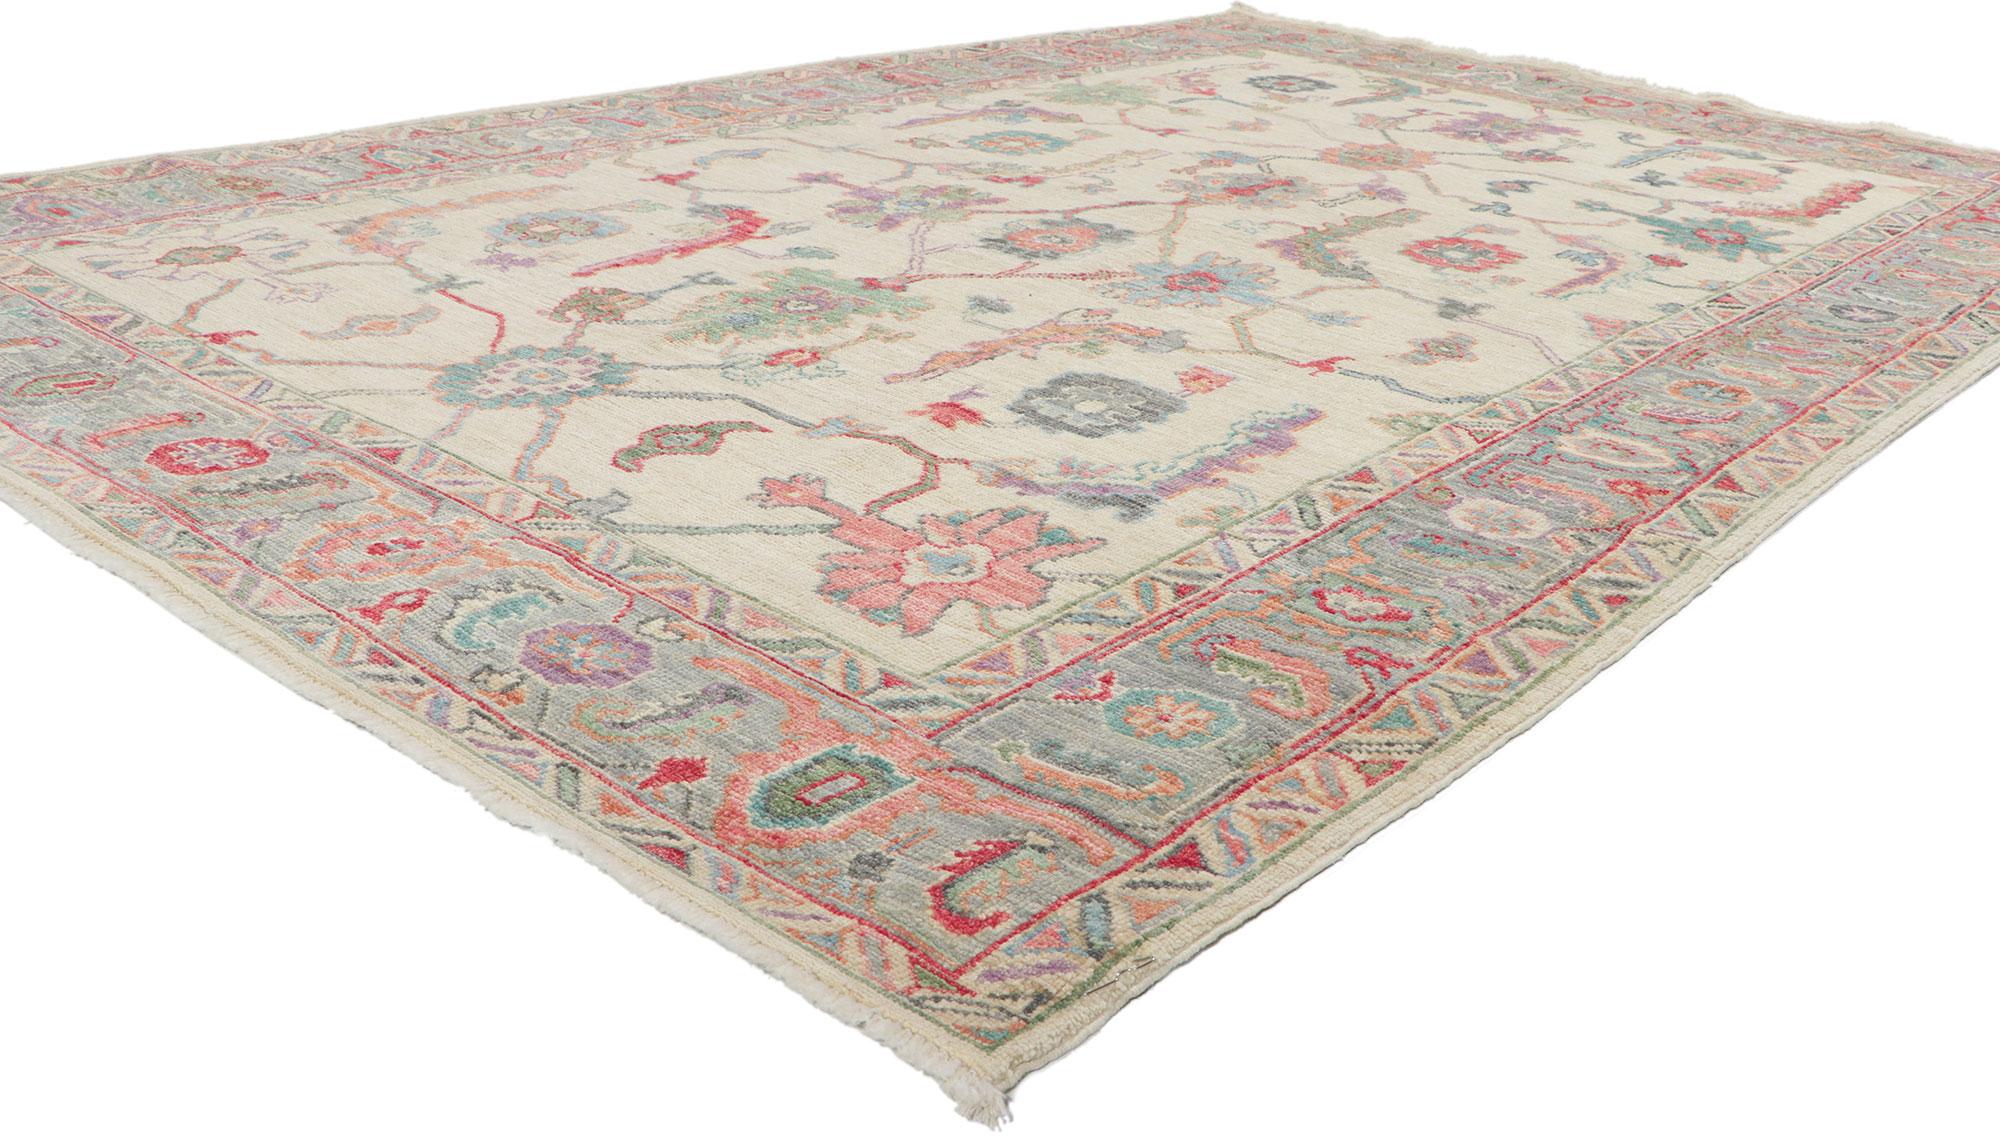 80971 Colorful Oushak Rug with Modern Style, 06'00 x 09'02.

Elevate your living space with the epitome of modern splendor embodied in this extravagant hand-knotted wool Oushak rug. Bursting with playful elegance and a soft color palette, this